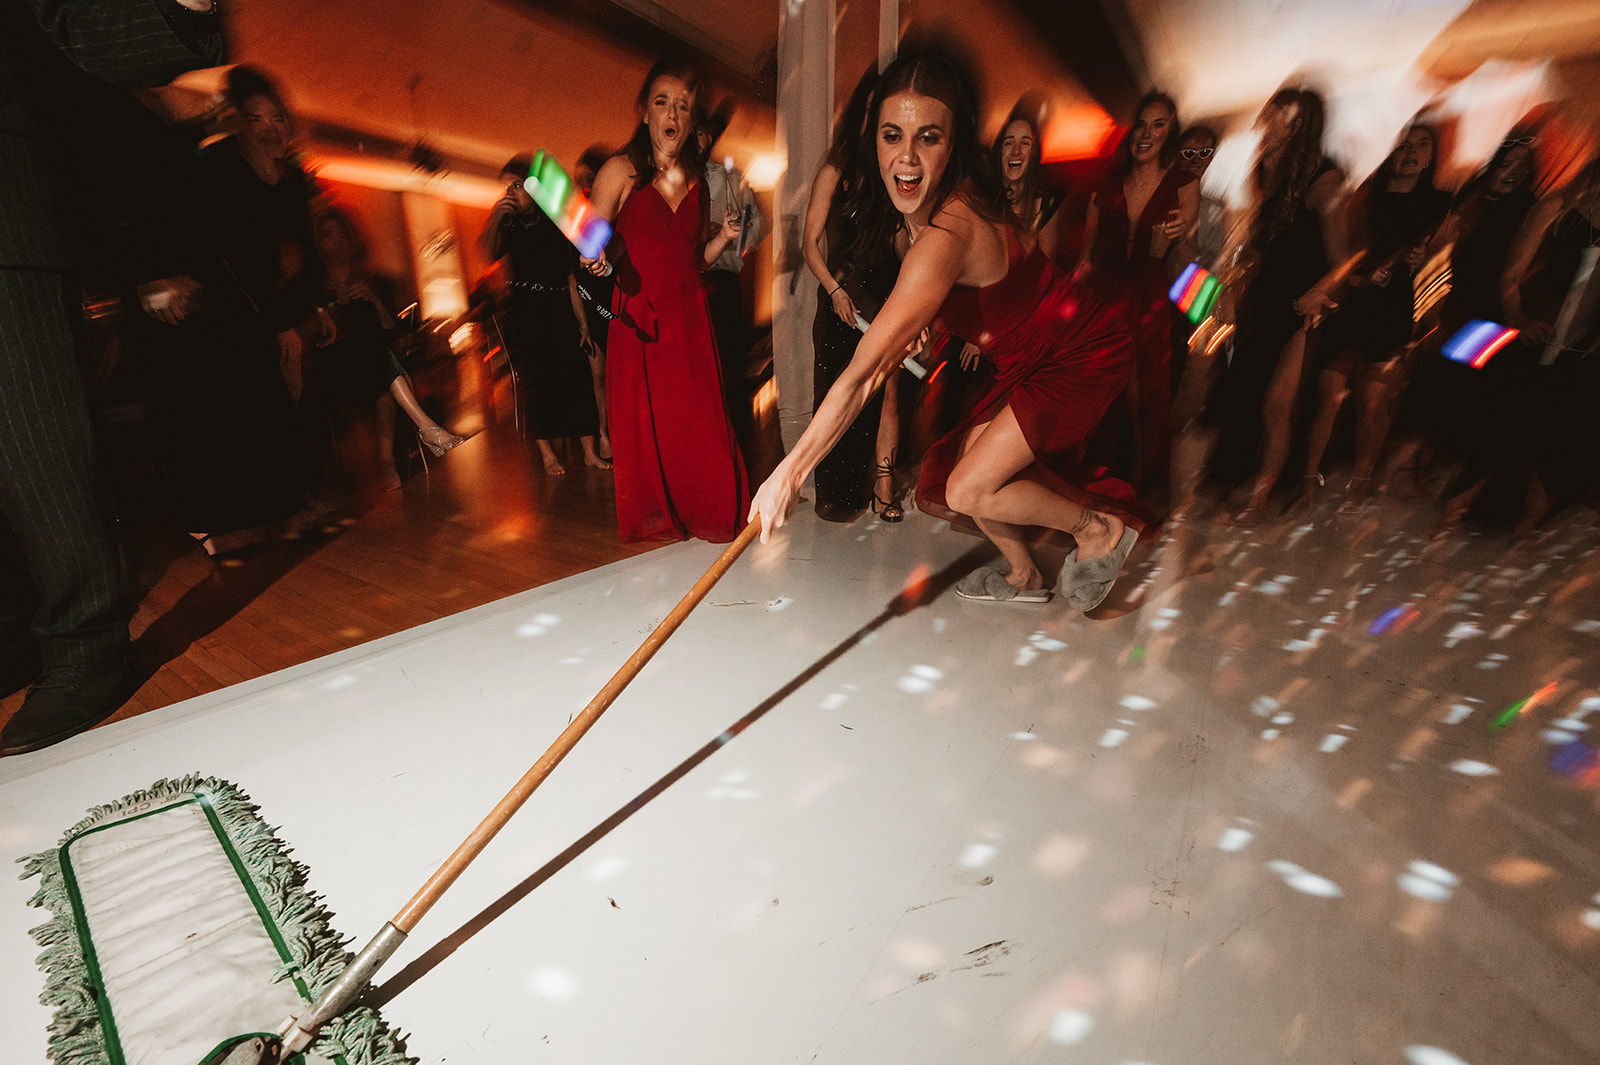 Chevy Chase Country Club Wedding Photo - Epic Dance Party 